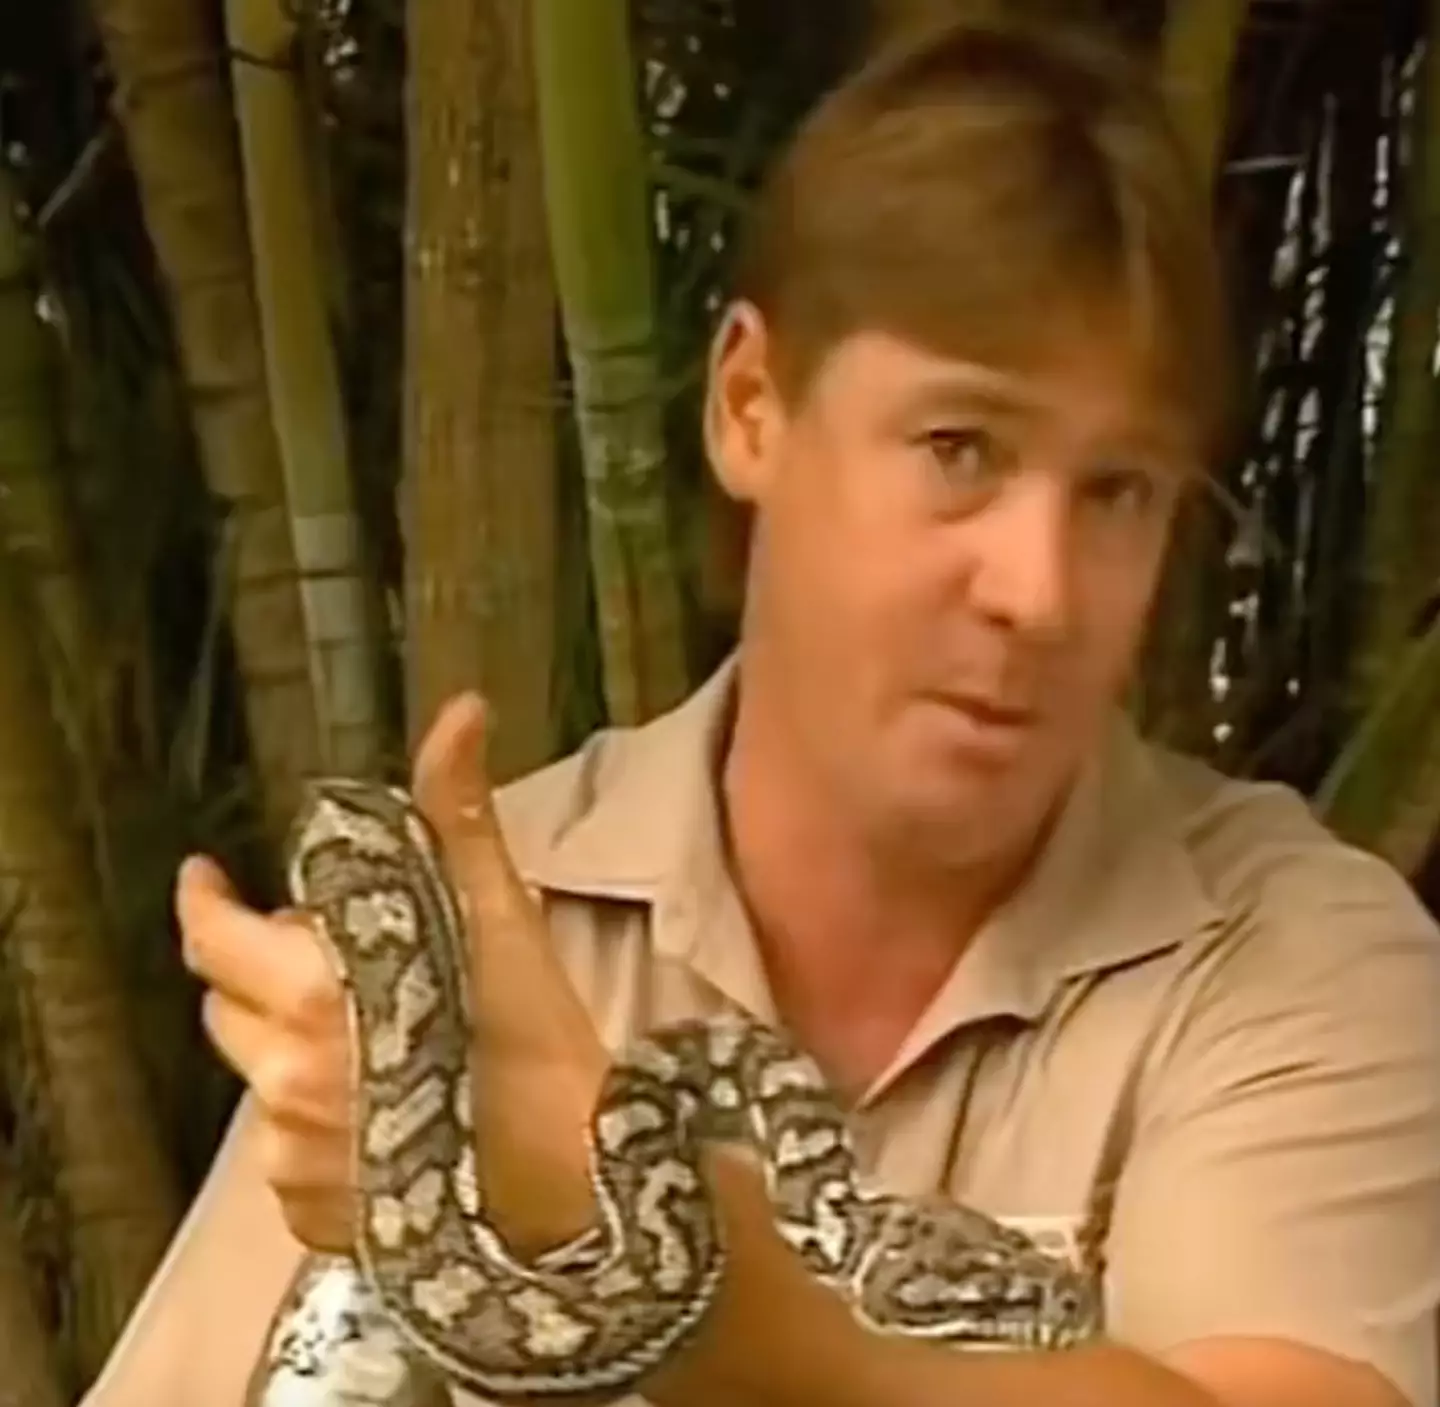 Steve Irwin kept his cool after being bitten by the snake.